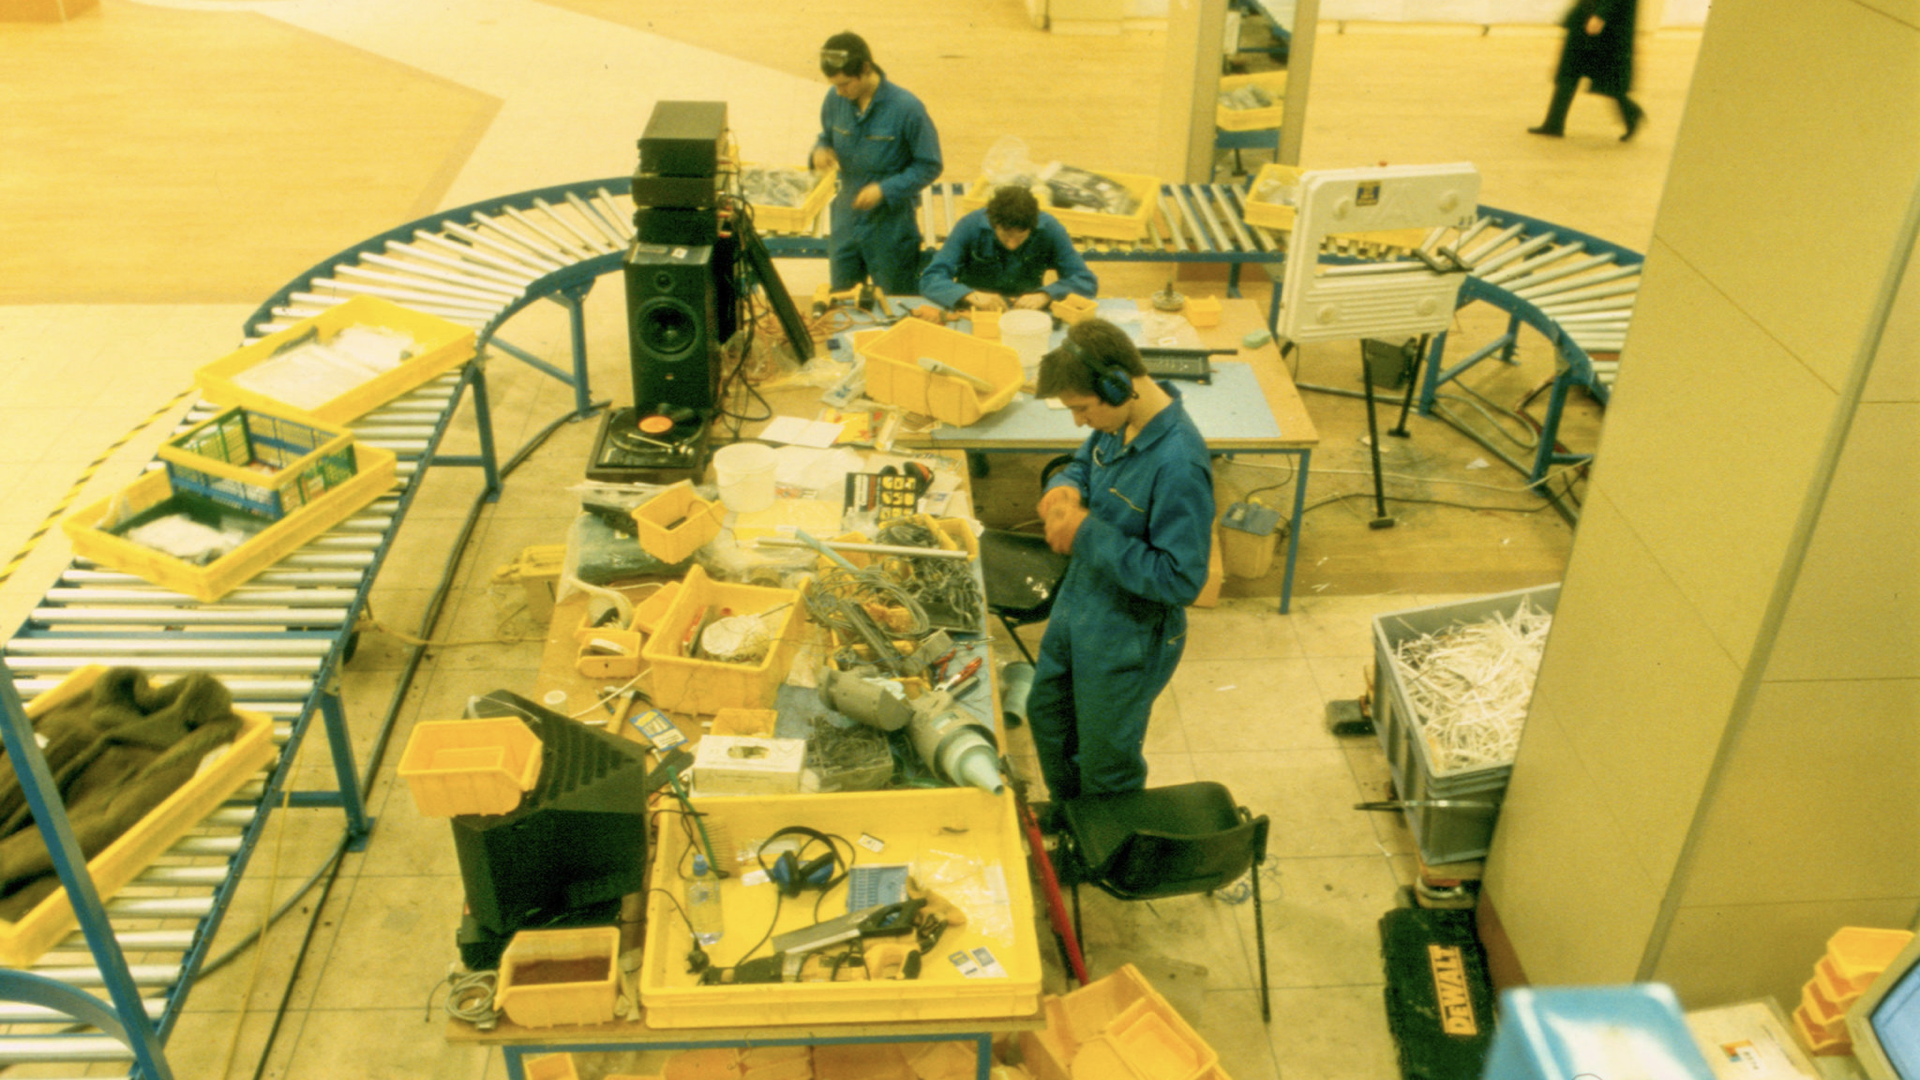 Three people in boilersuits working next to a conveyor belt, dismantling items.